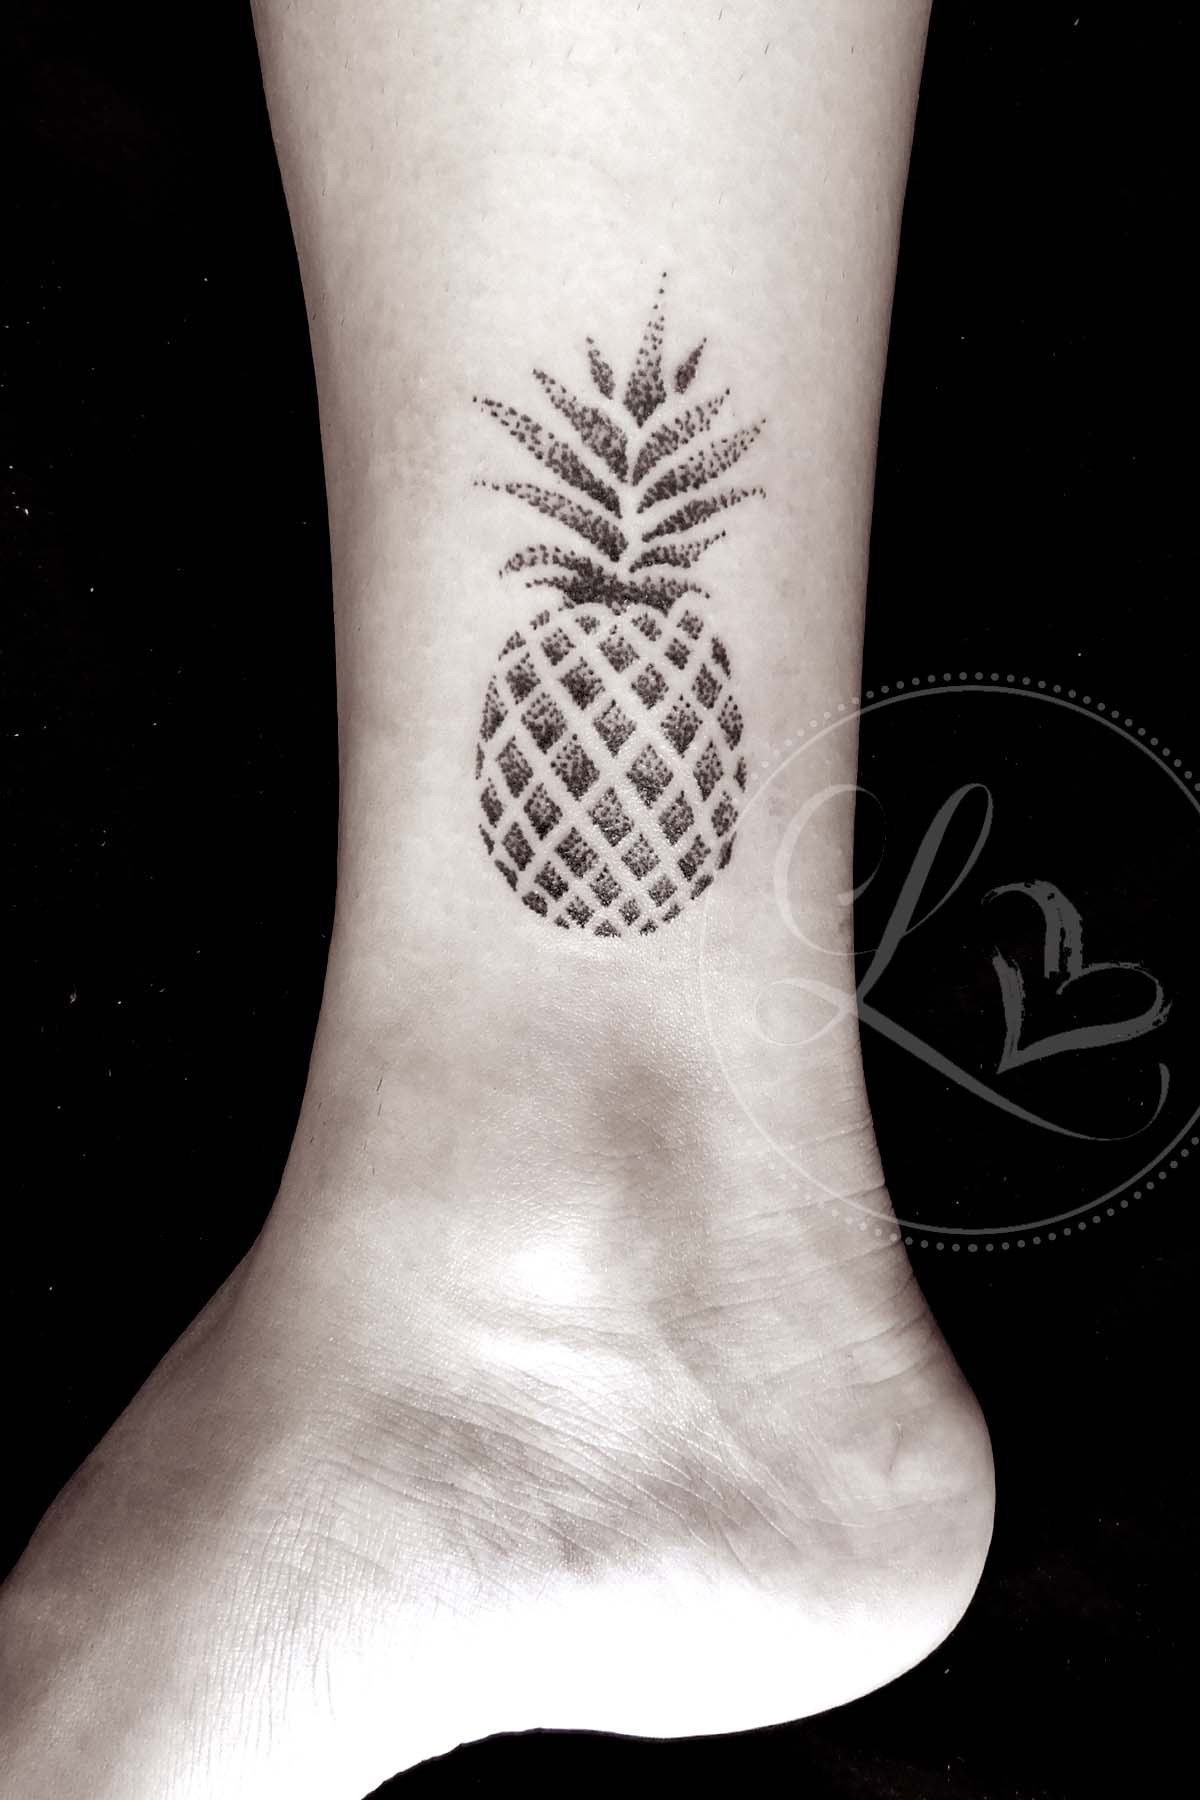 Welcome to 22 Pineapple aka Ananas Tattoo Designs and Their Meanings